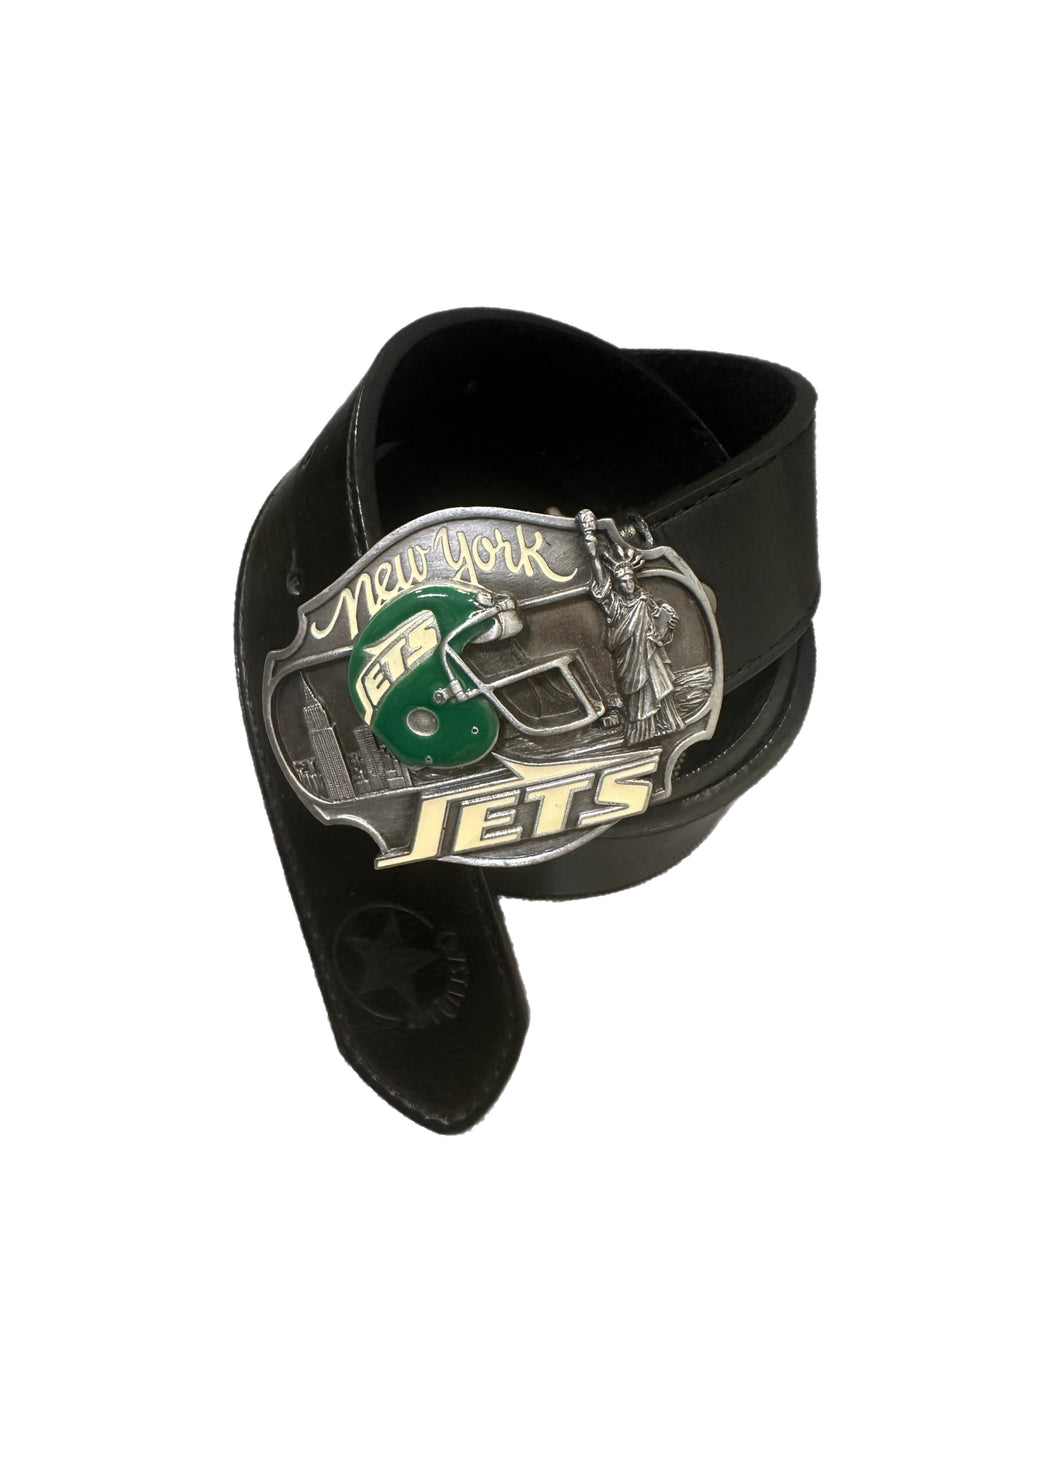 NY Jets, Football Vintage 1987 Belt Buckle with New Soft Leather Strap